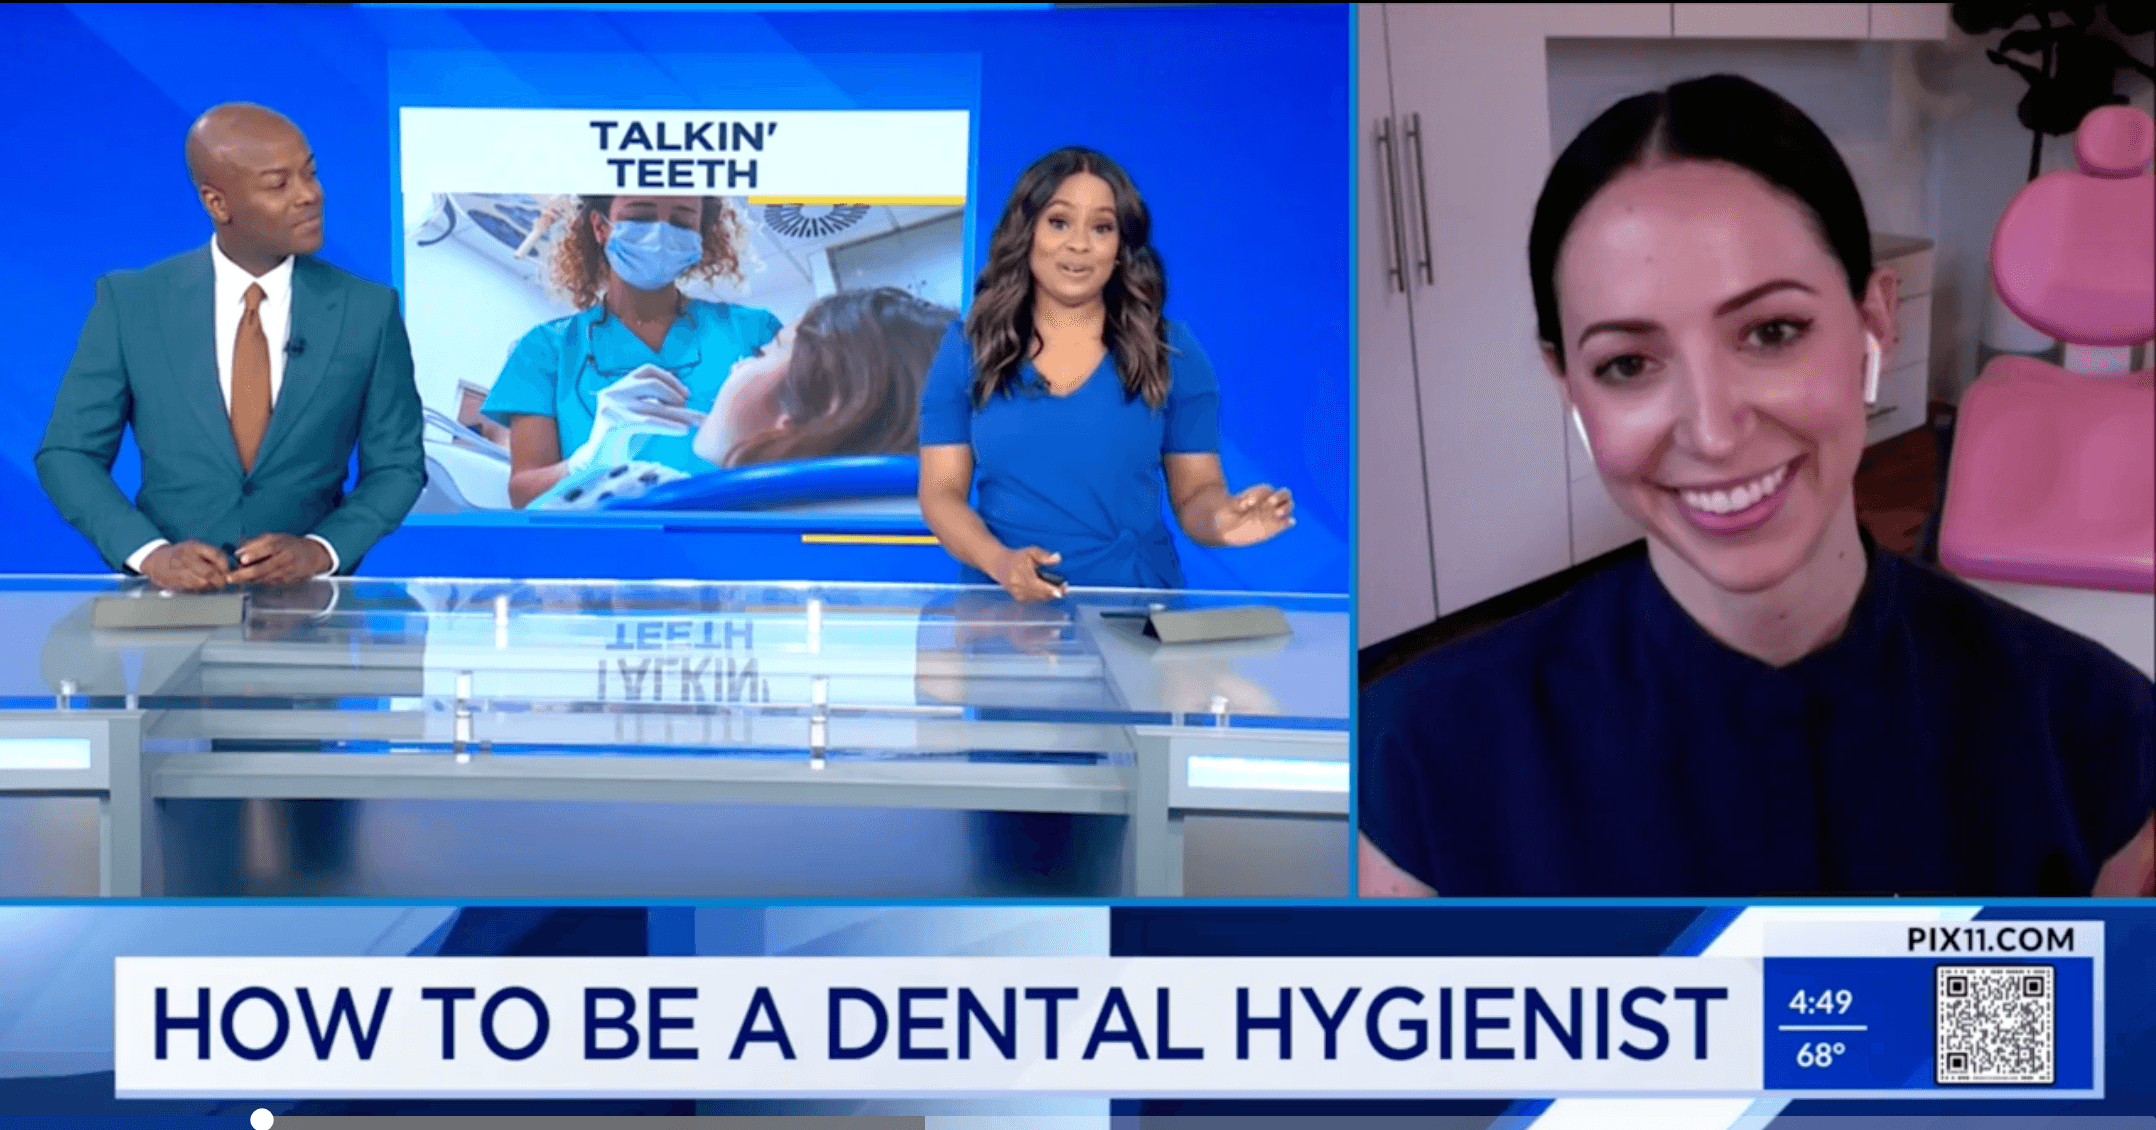 How to be a dental hygienist